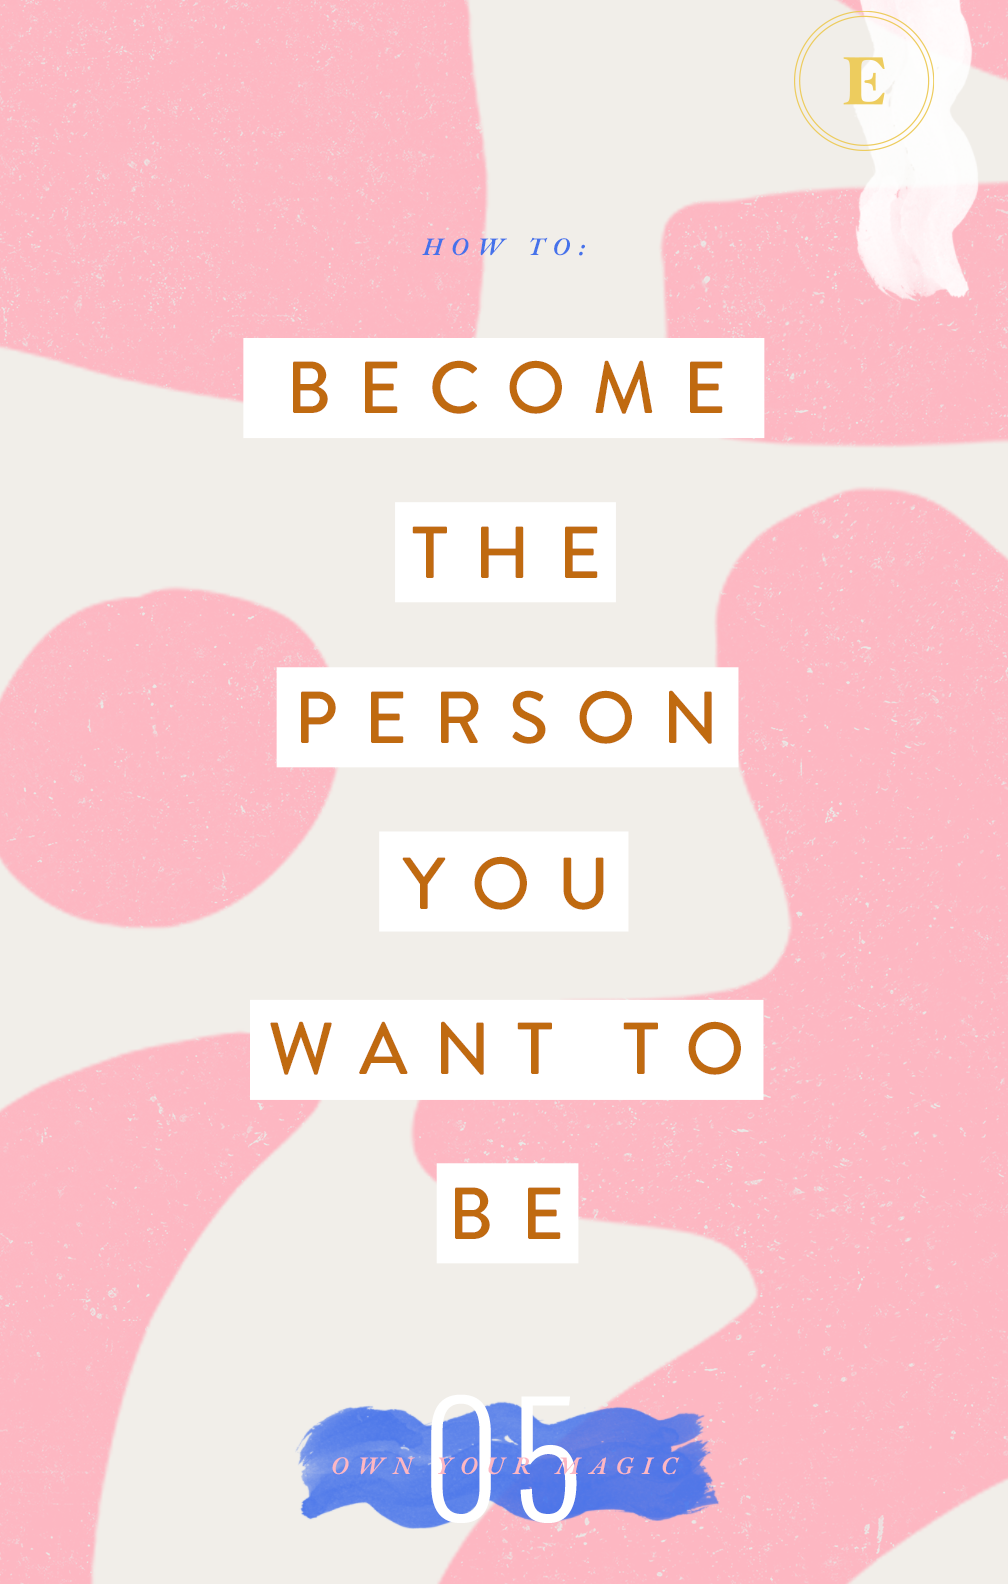 You are more than capable and have what it takes to become the person you want to be. I'm going to walk you through how to do it and why you can.